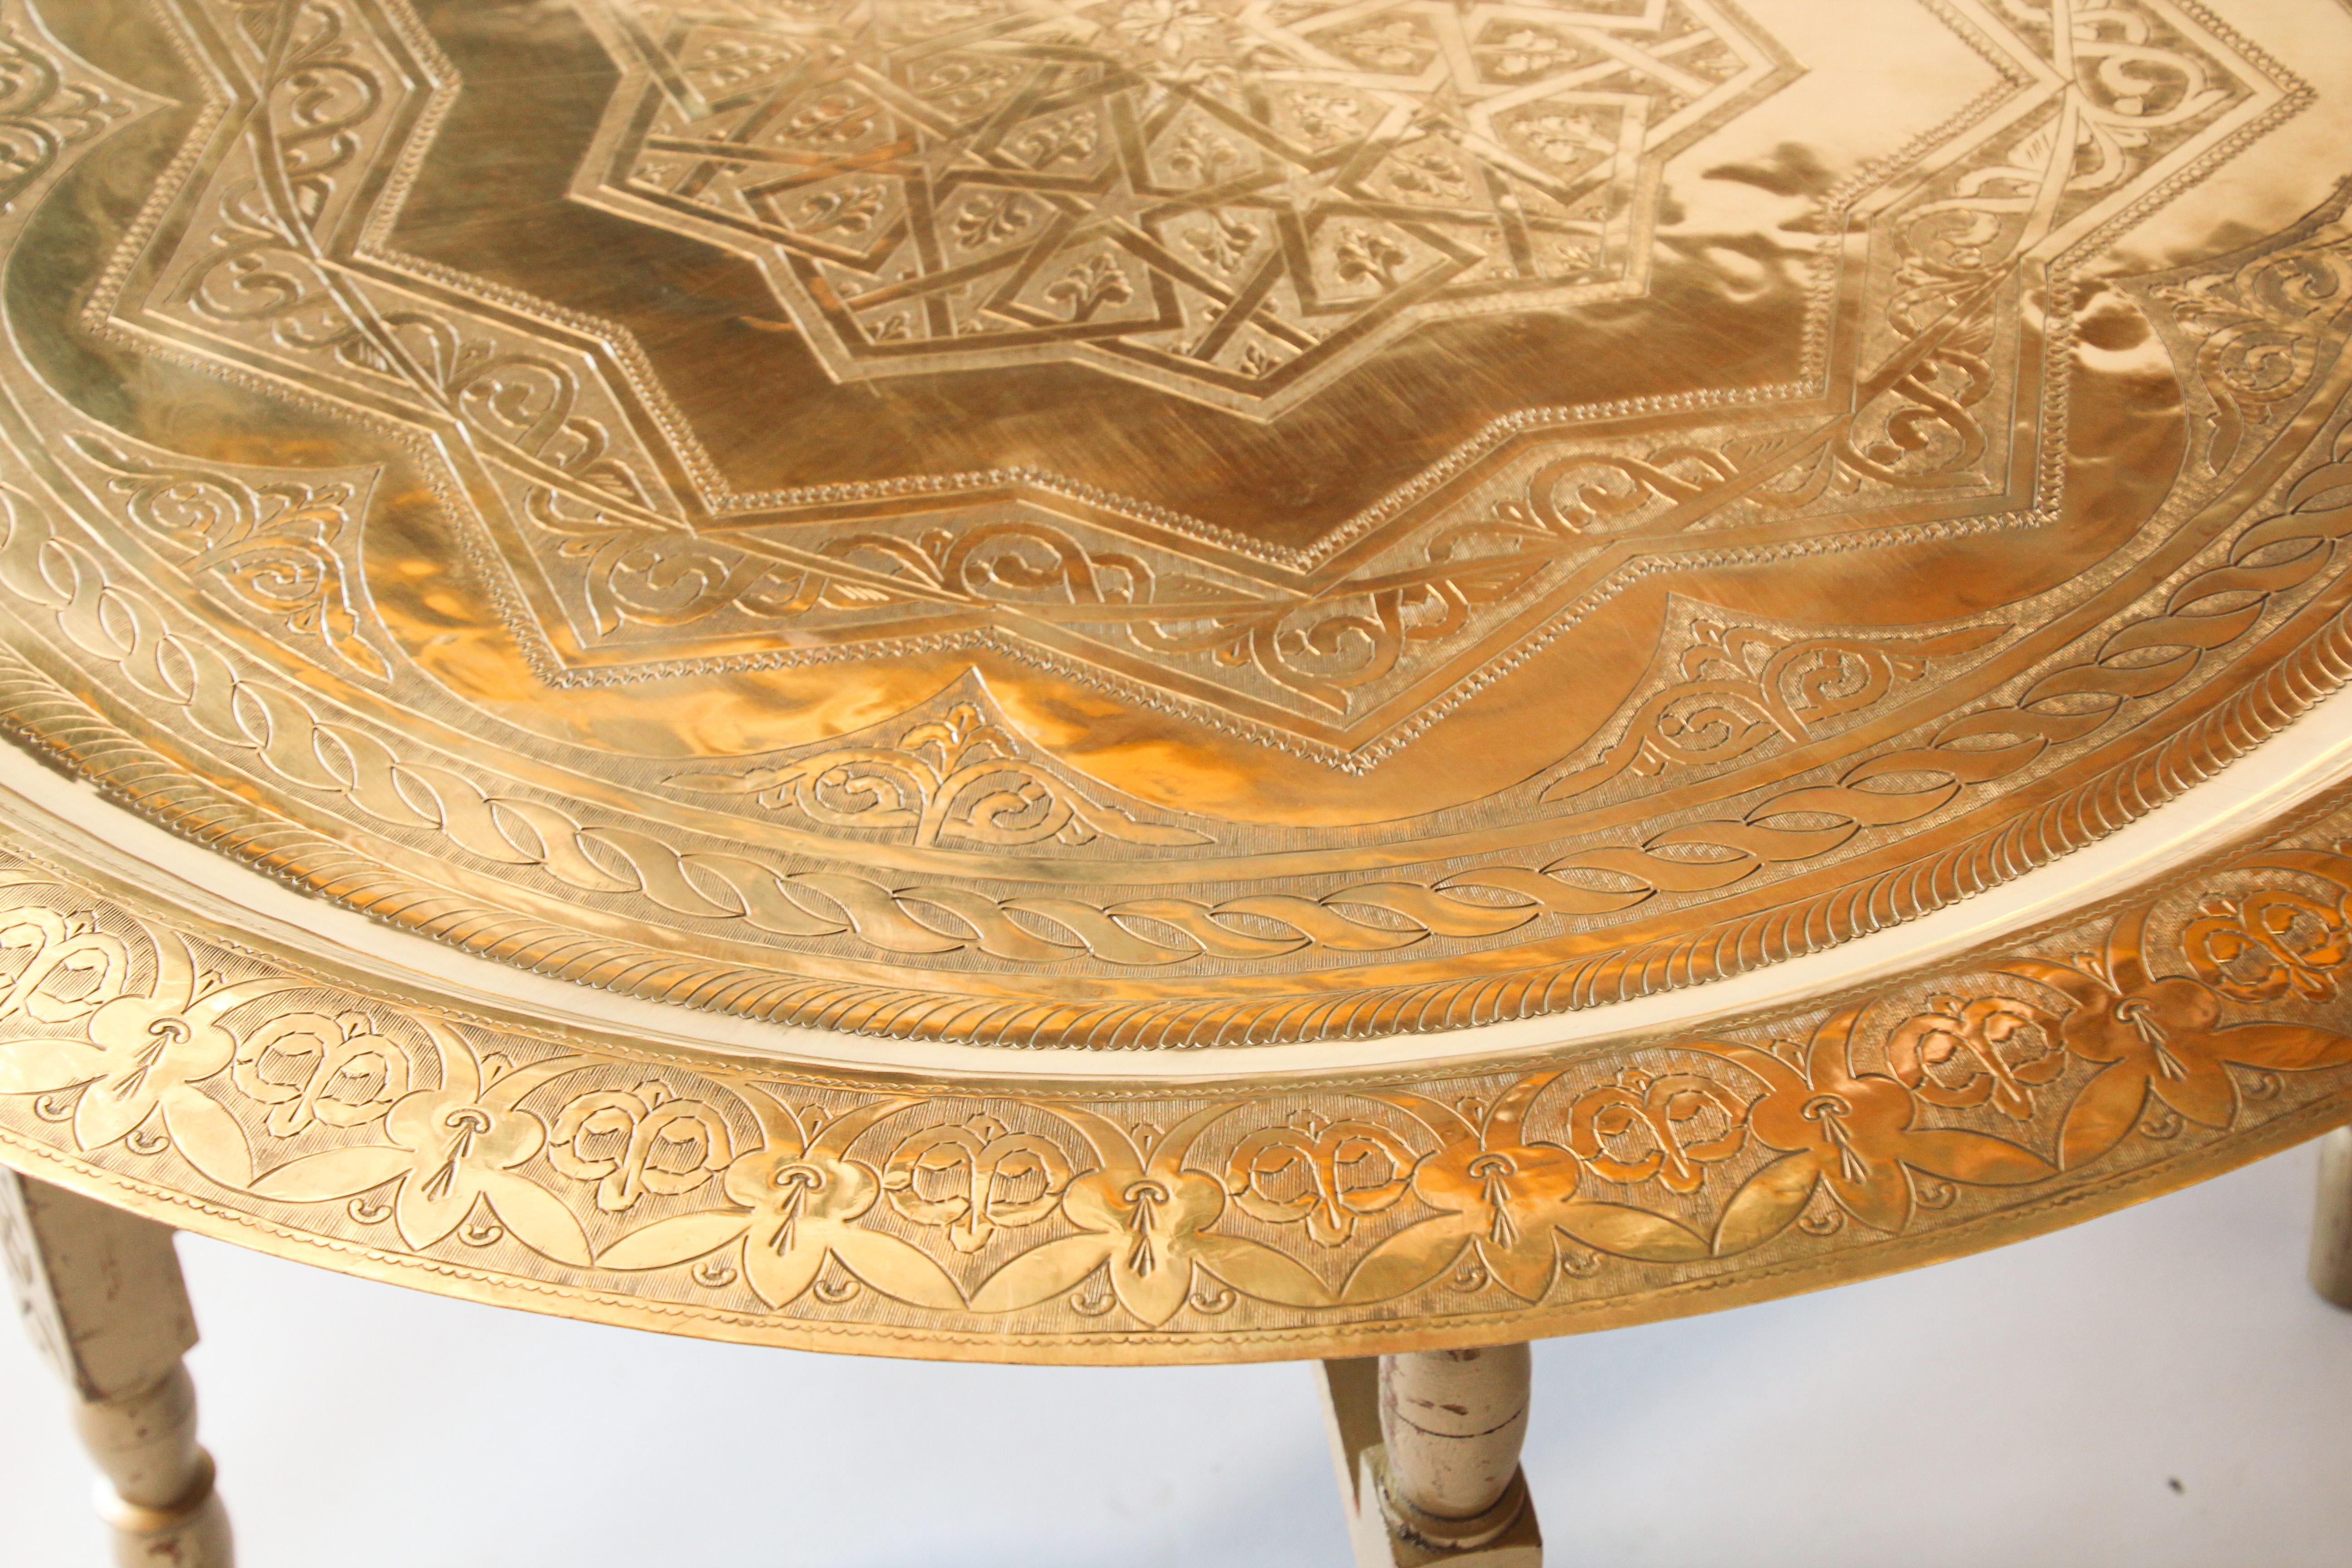 20th Century Moroccan Large Polished Brass Tray Table on Folding Stand 40 in.Diameter